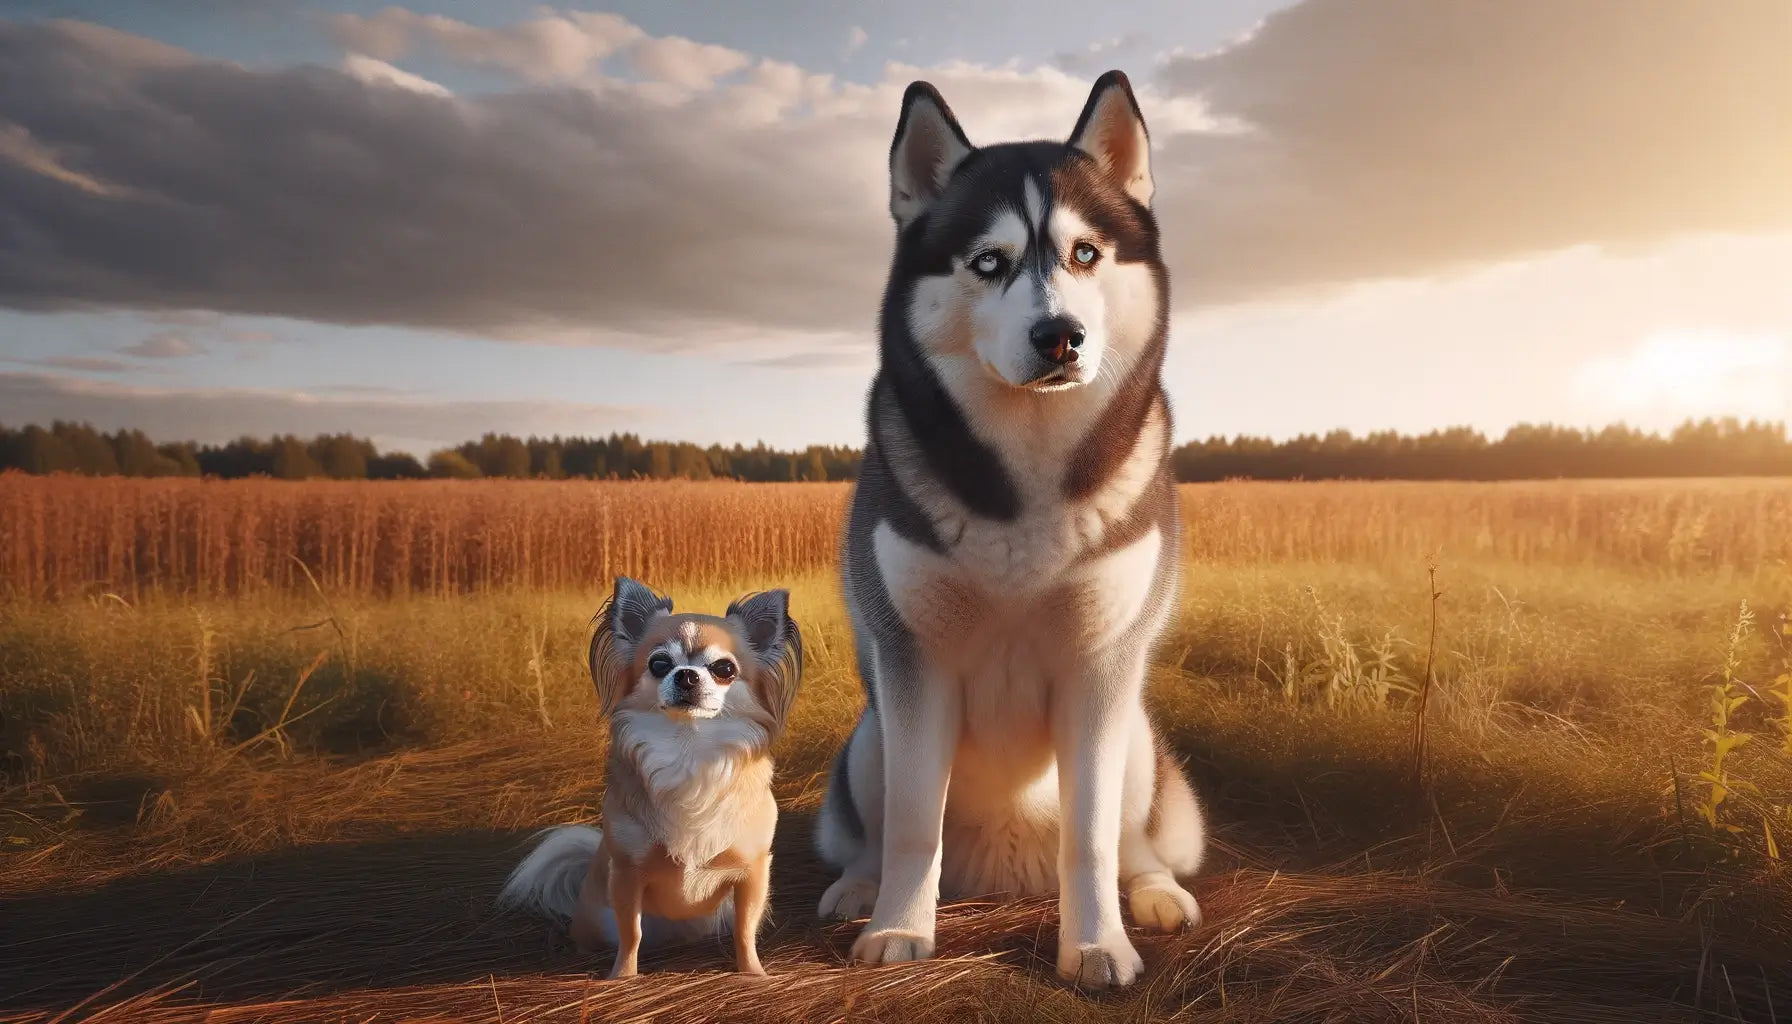 A Chihuahua Husky Mix standing next to a full-sized Husky in a field, offering a direct comparison between the large stature of the Siberian Husky and the mix.